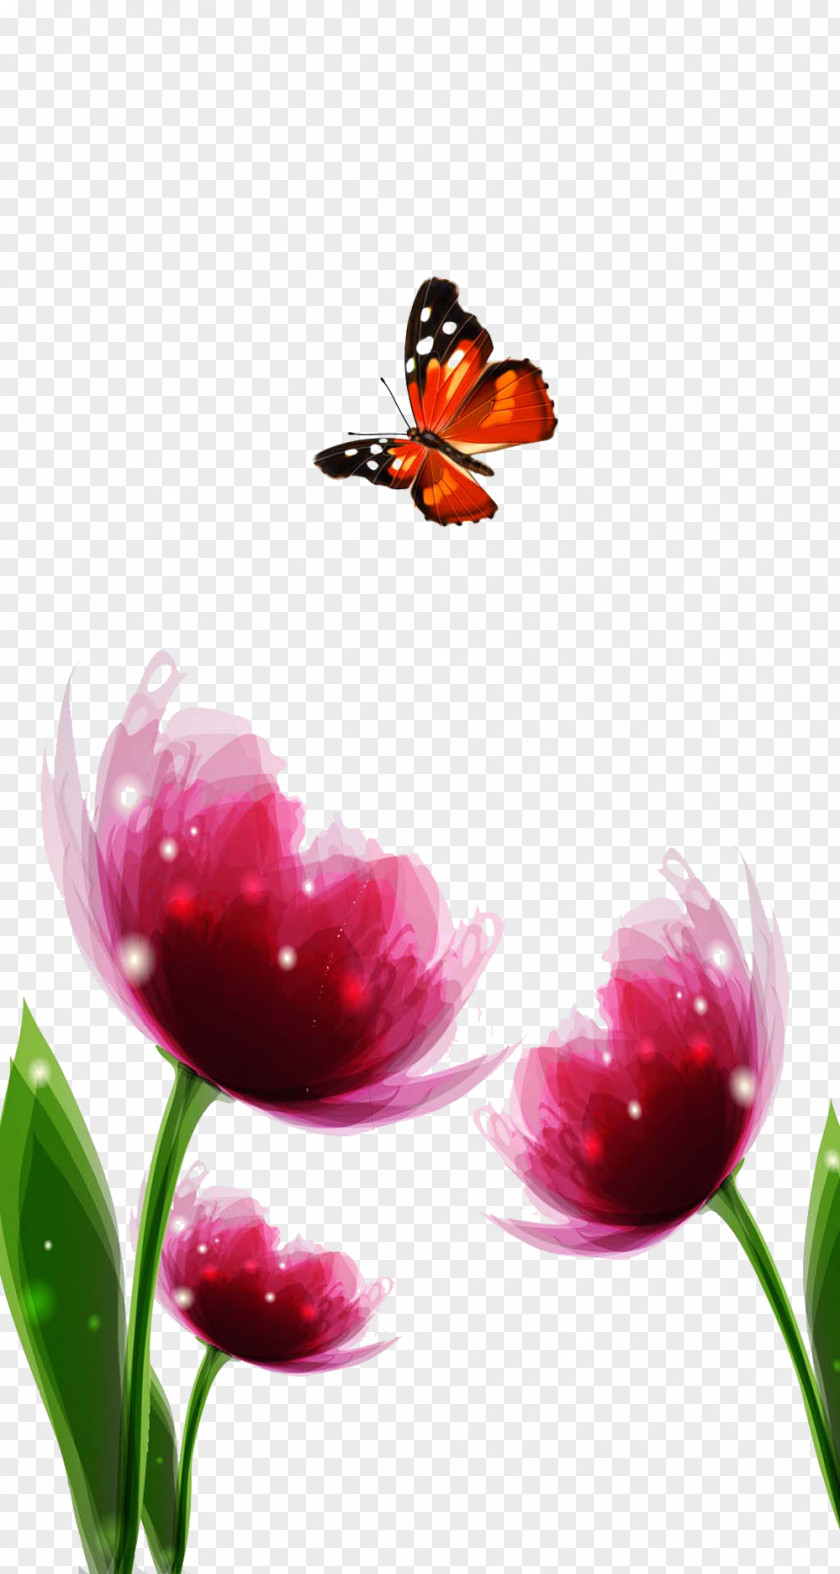 Tulips Cited Butterfly Picture Material Nymphalidae Tulip Flower PNG